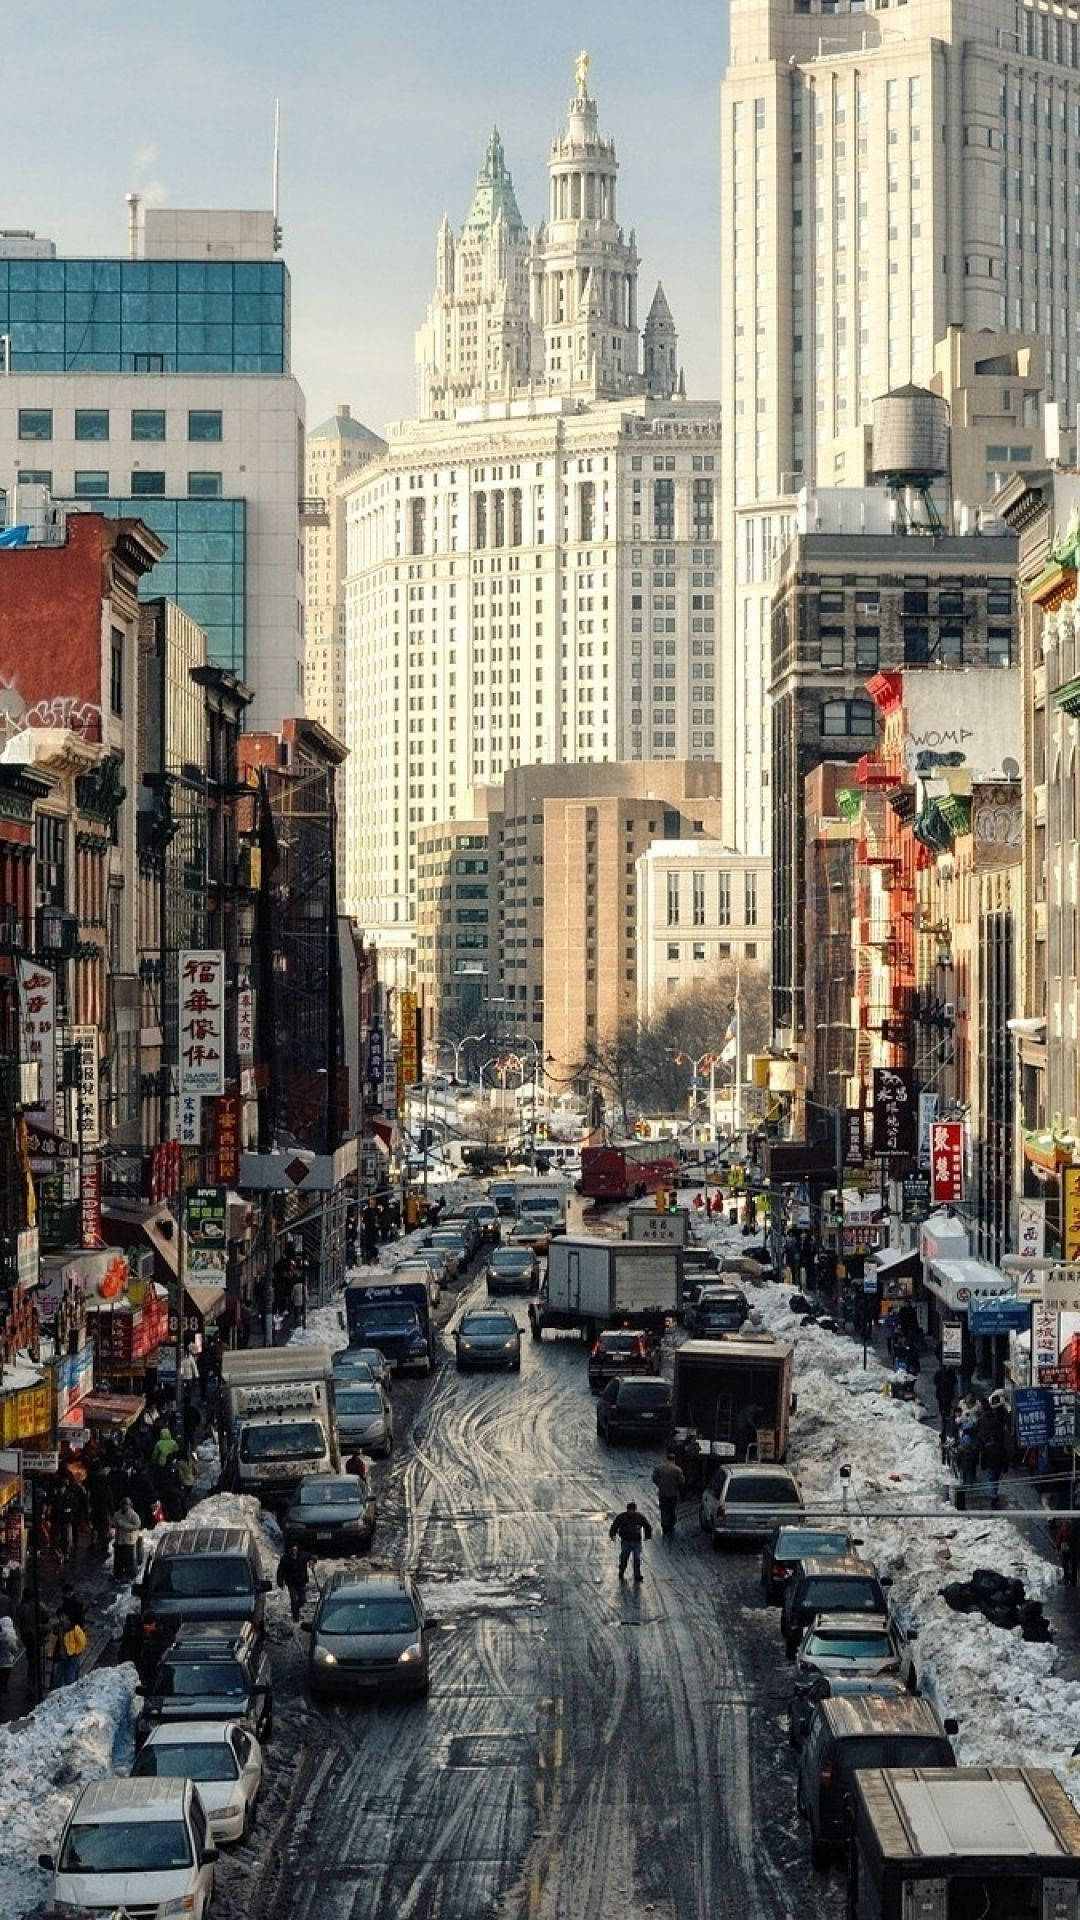 Little Chinatown In New York Iphone Background